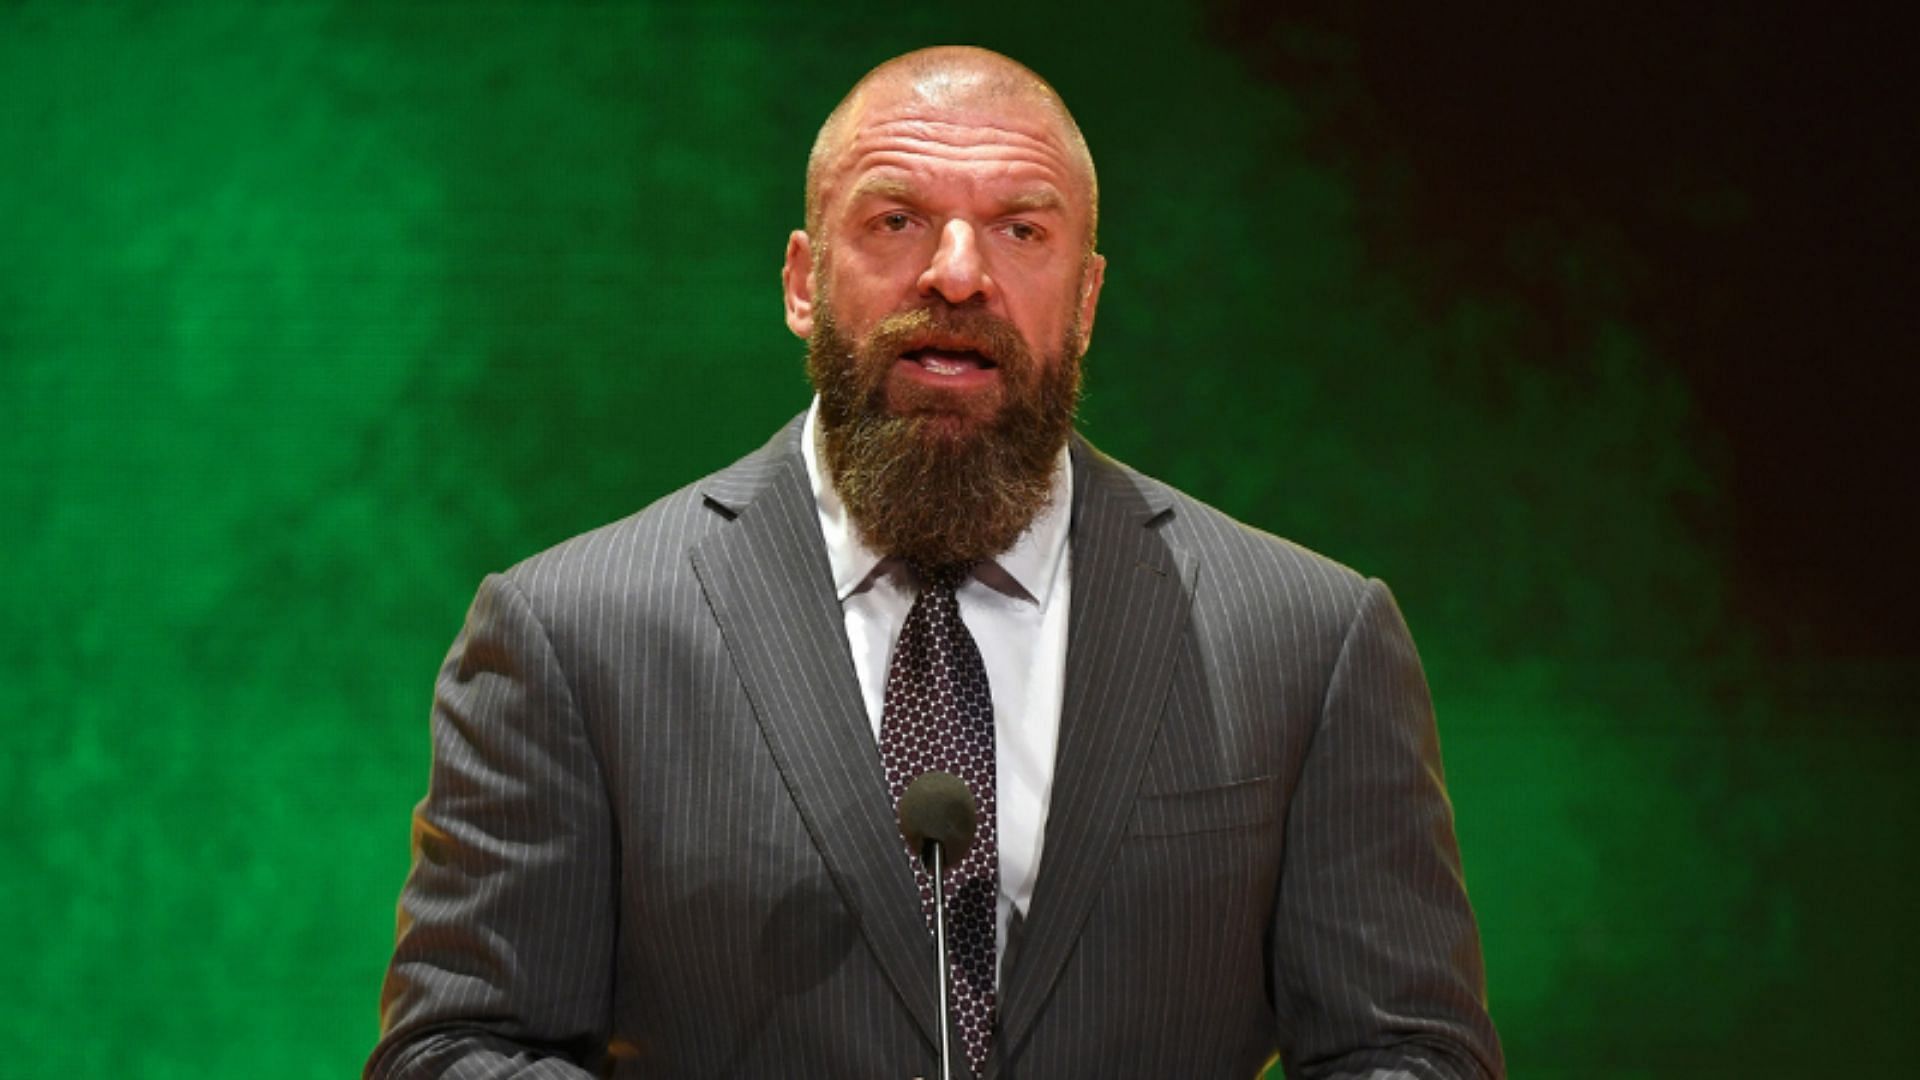 Triple H is an executive and 14-time World Champion.